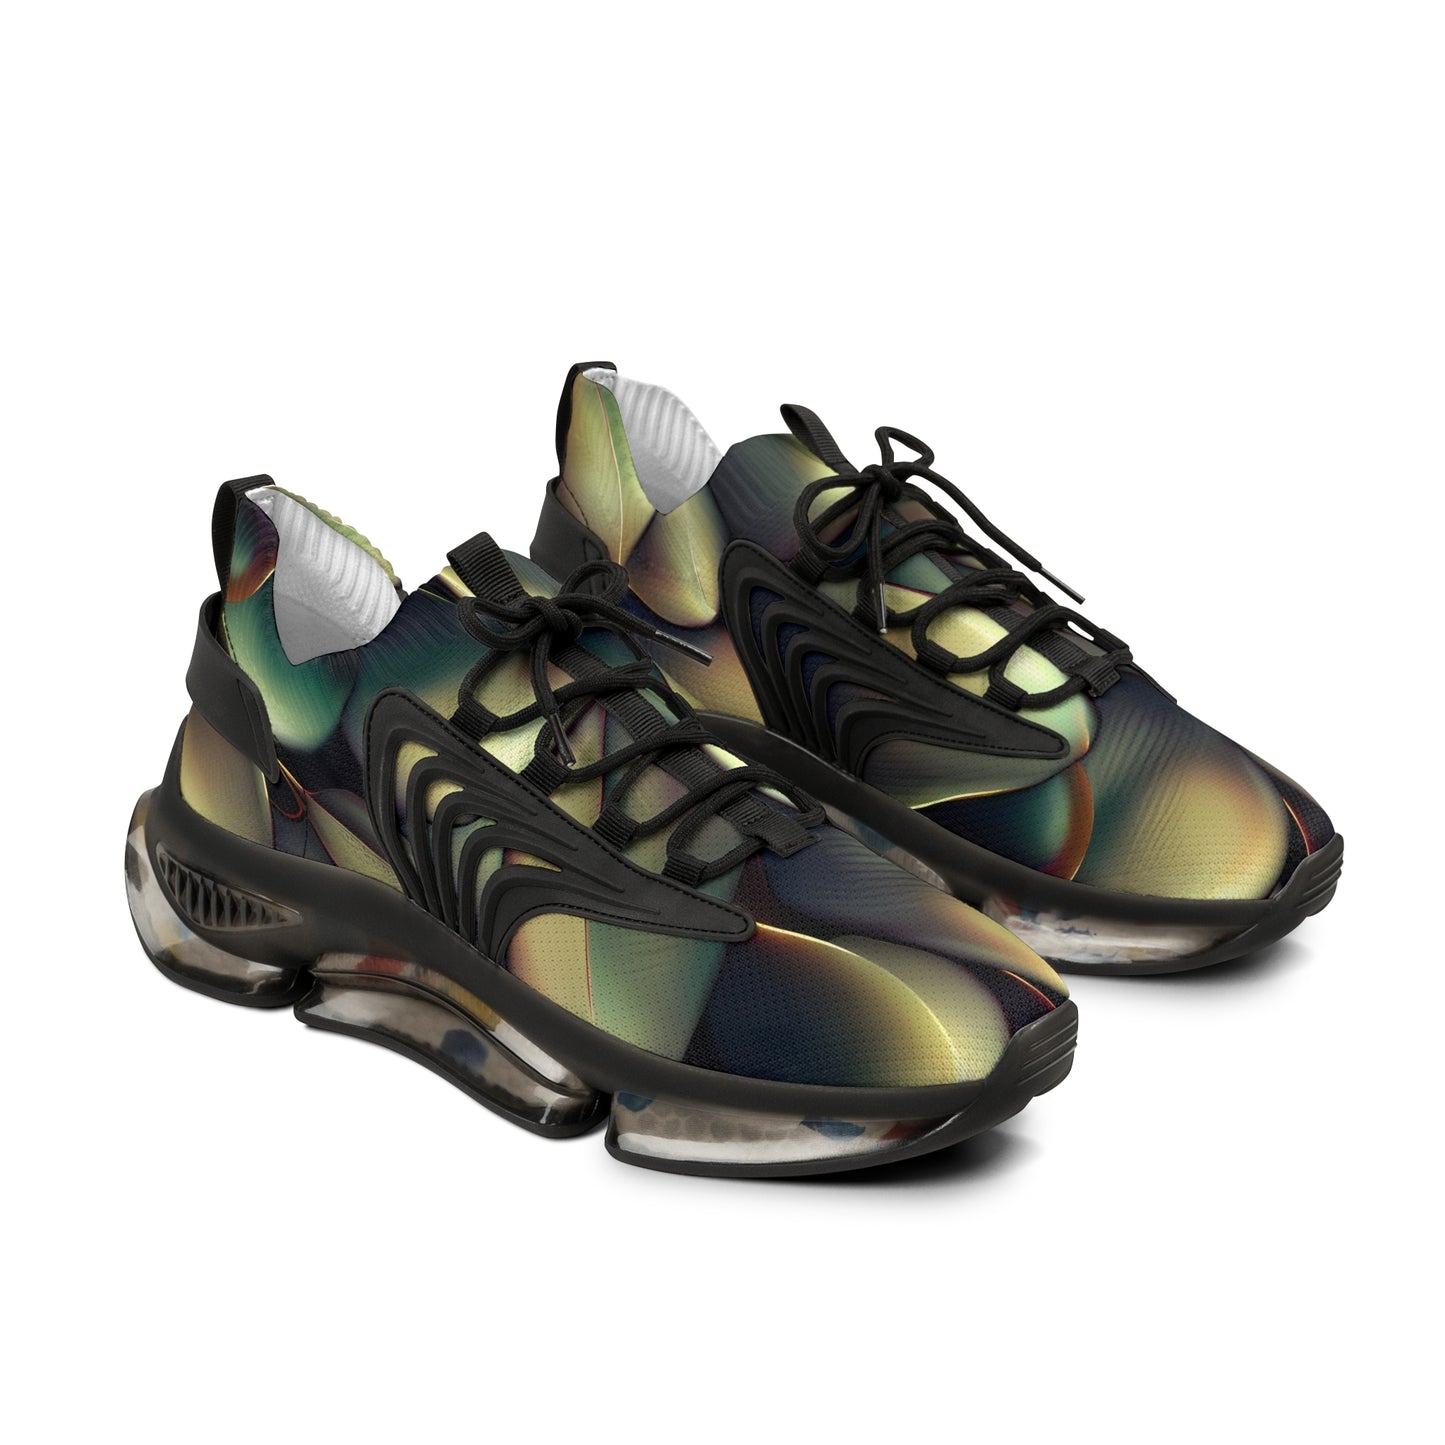 All Over Print Men's Mesh Sneakers - Ficus Platyphylla Patterns Mens Fashion Sneakers